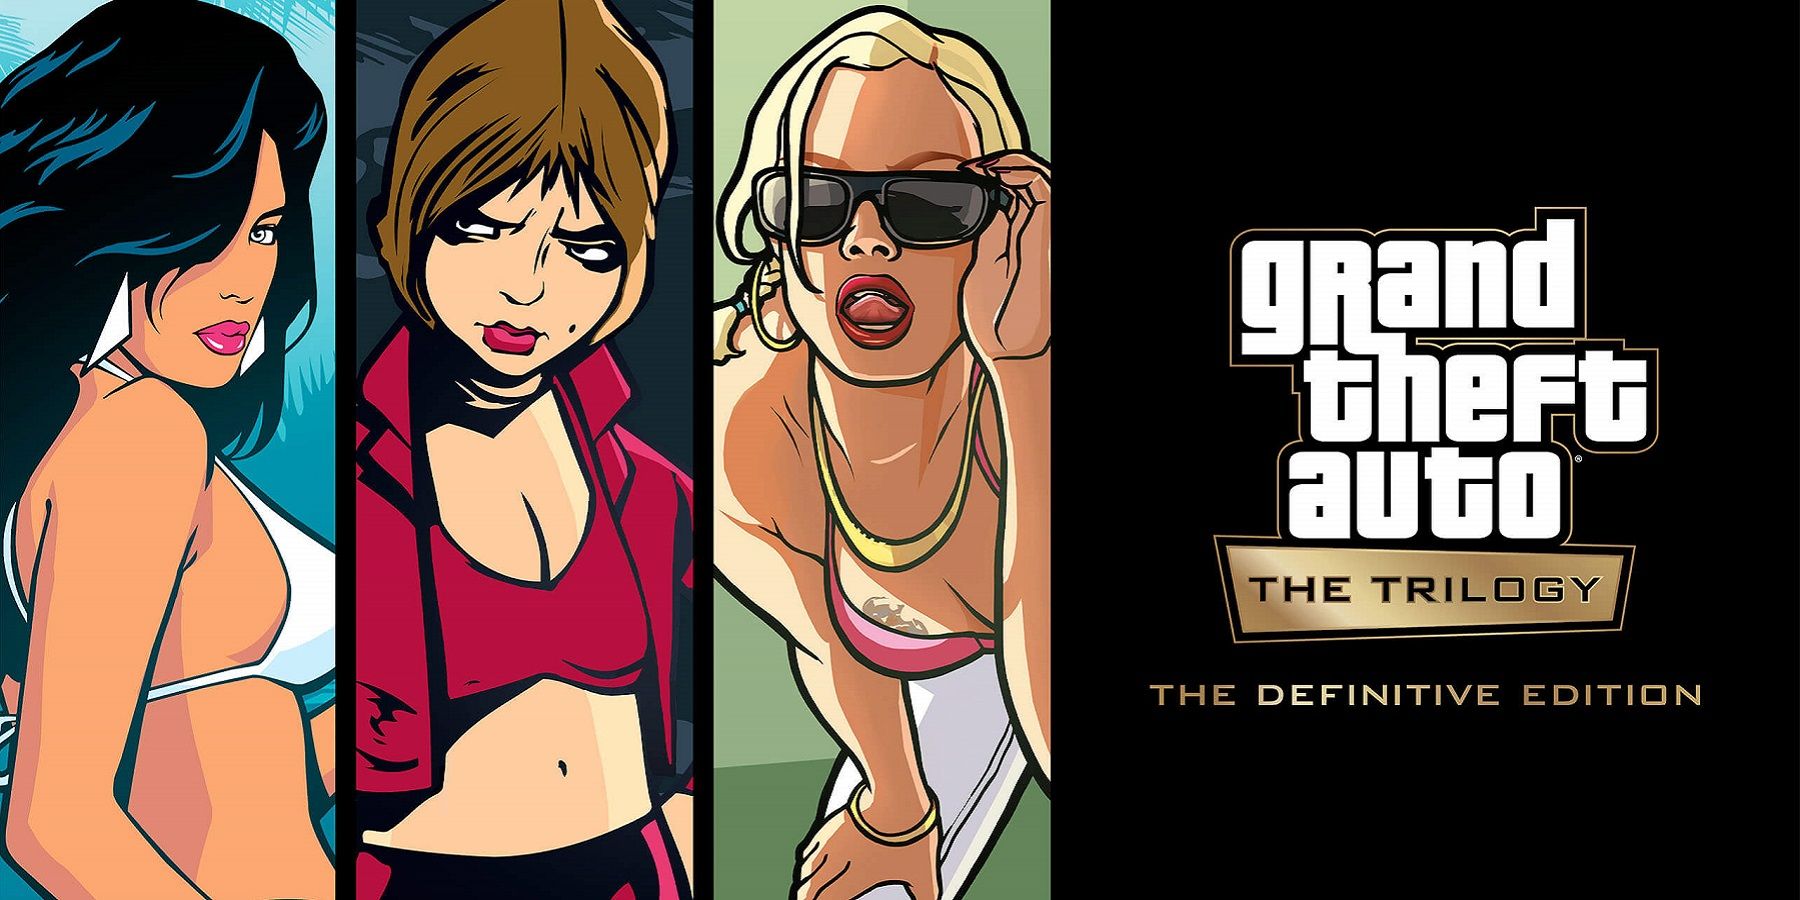 Image from the Grand Theft Auto Trilogy showing the women from GTA 3, Vice City and San Andreas.